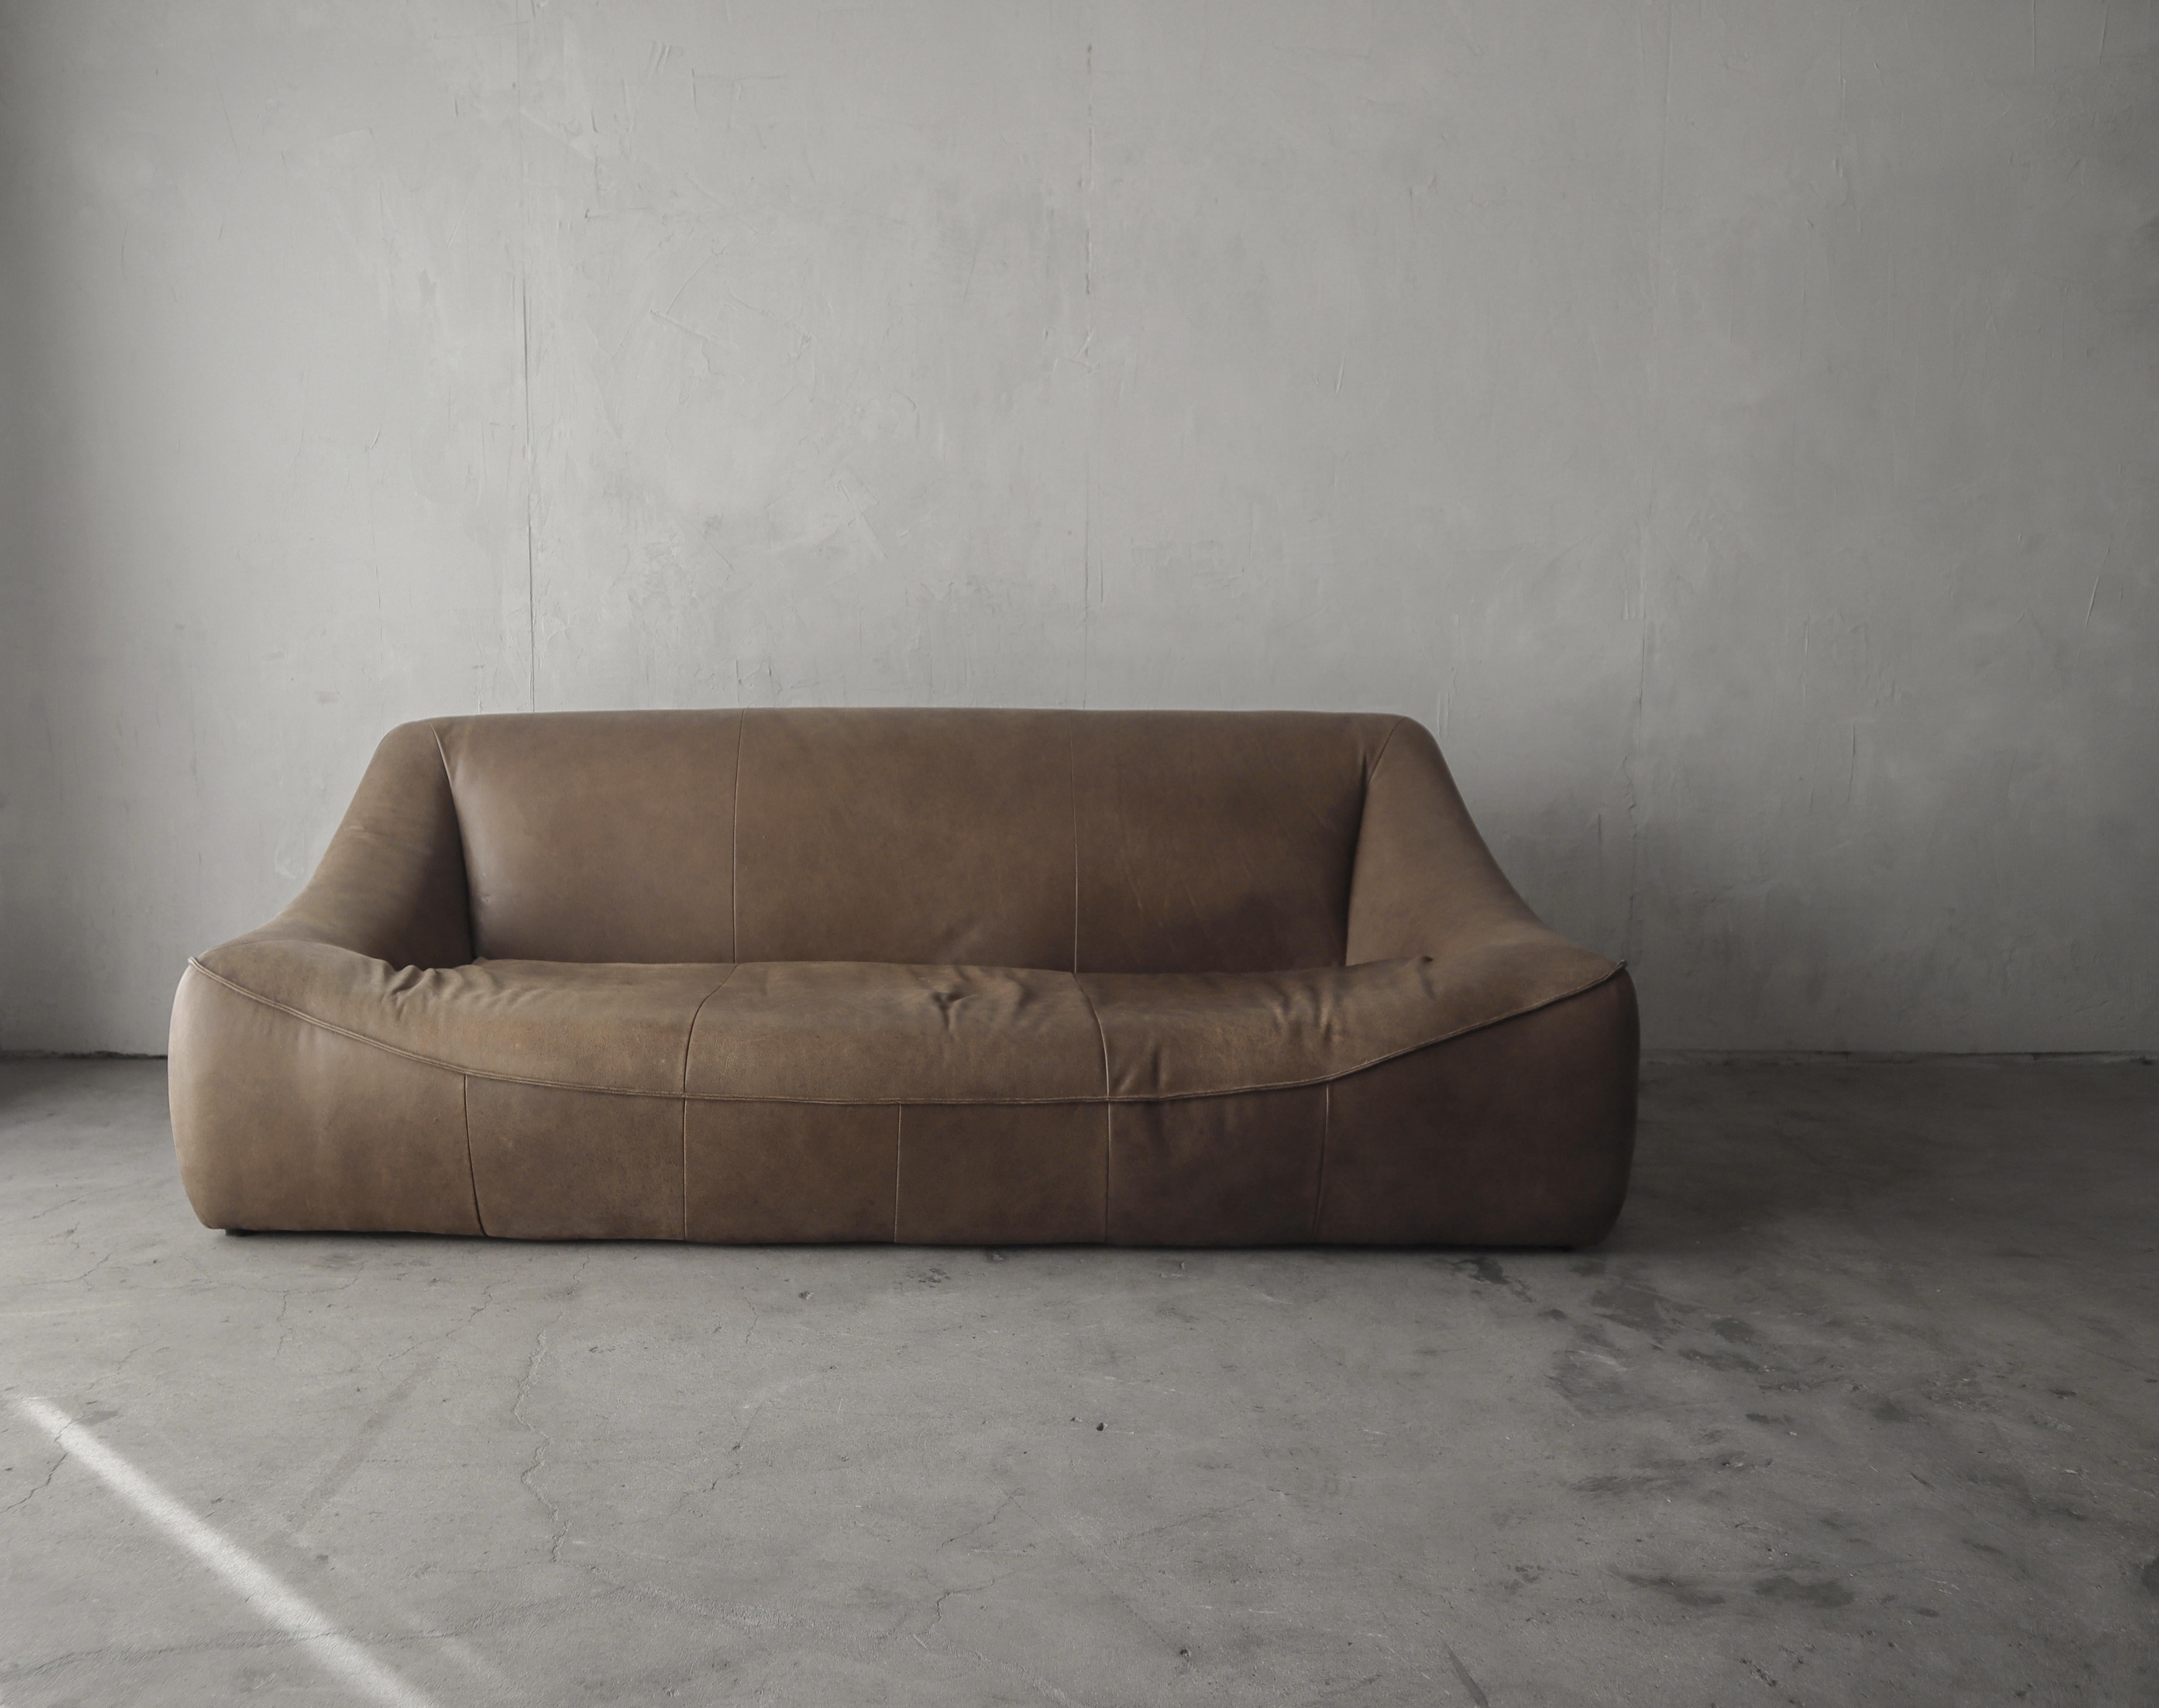 Large organic shaped 3-seat sofa with supple rounded lines. Sofa is a thick, milk chocolate colored top grain leather with top stitching and light patina that add to its detail.

 

There is no damage to be noted.